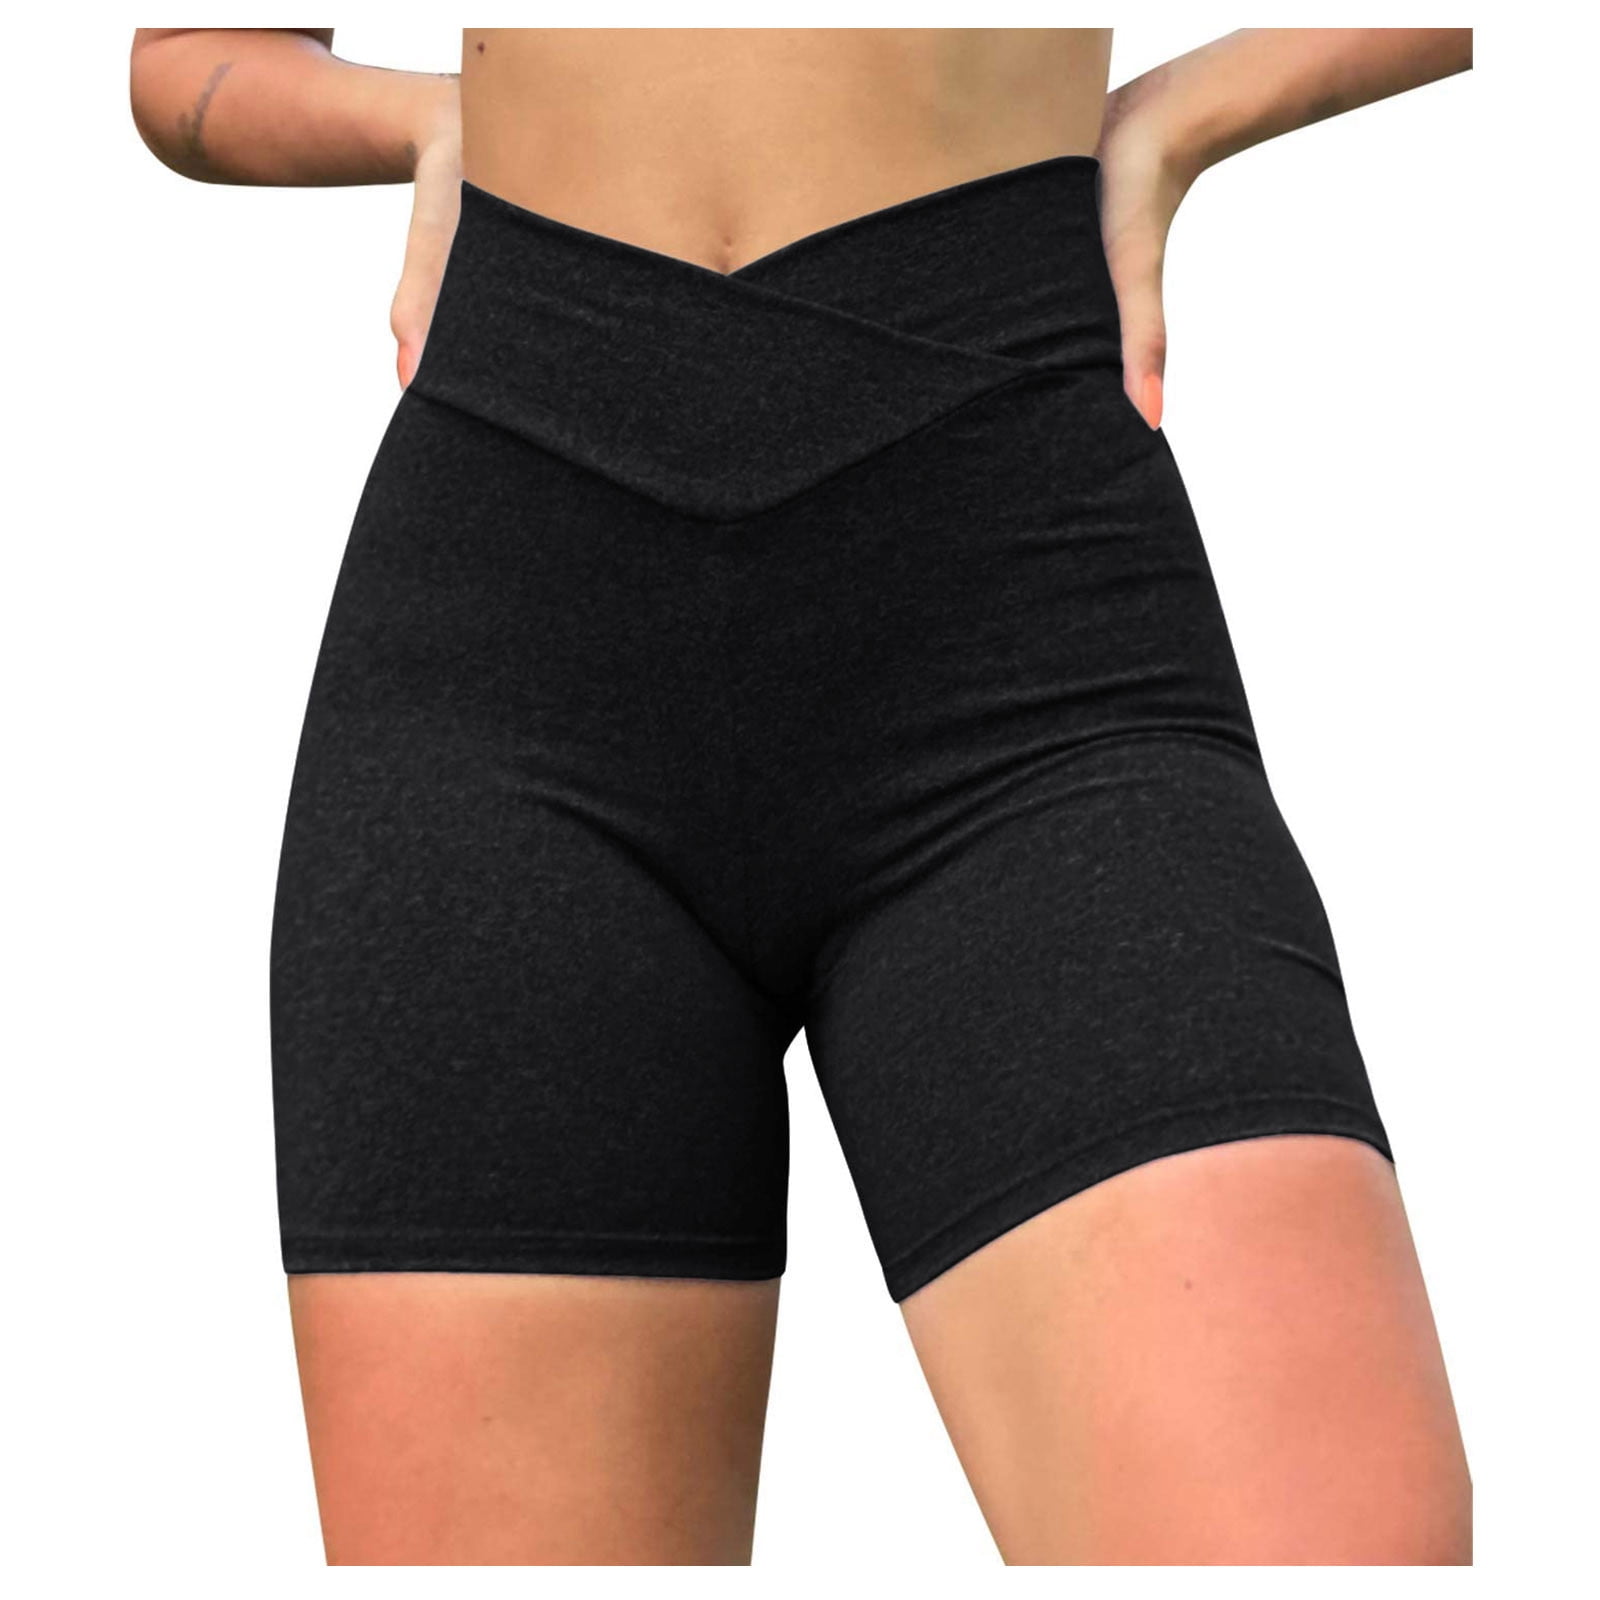 JDEFEG Yoga Pants with Pockets for Women Tall Sports Women's